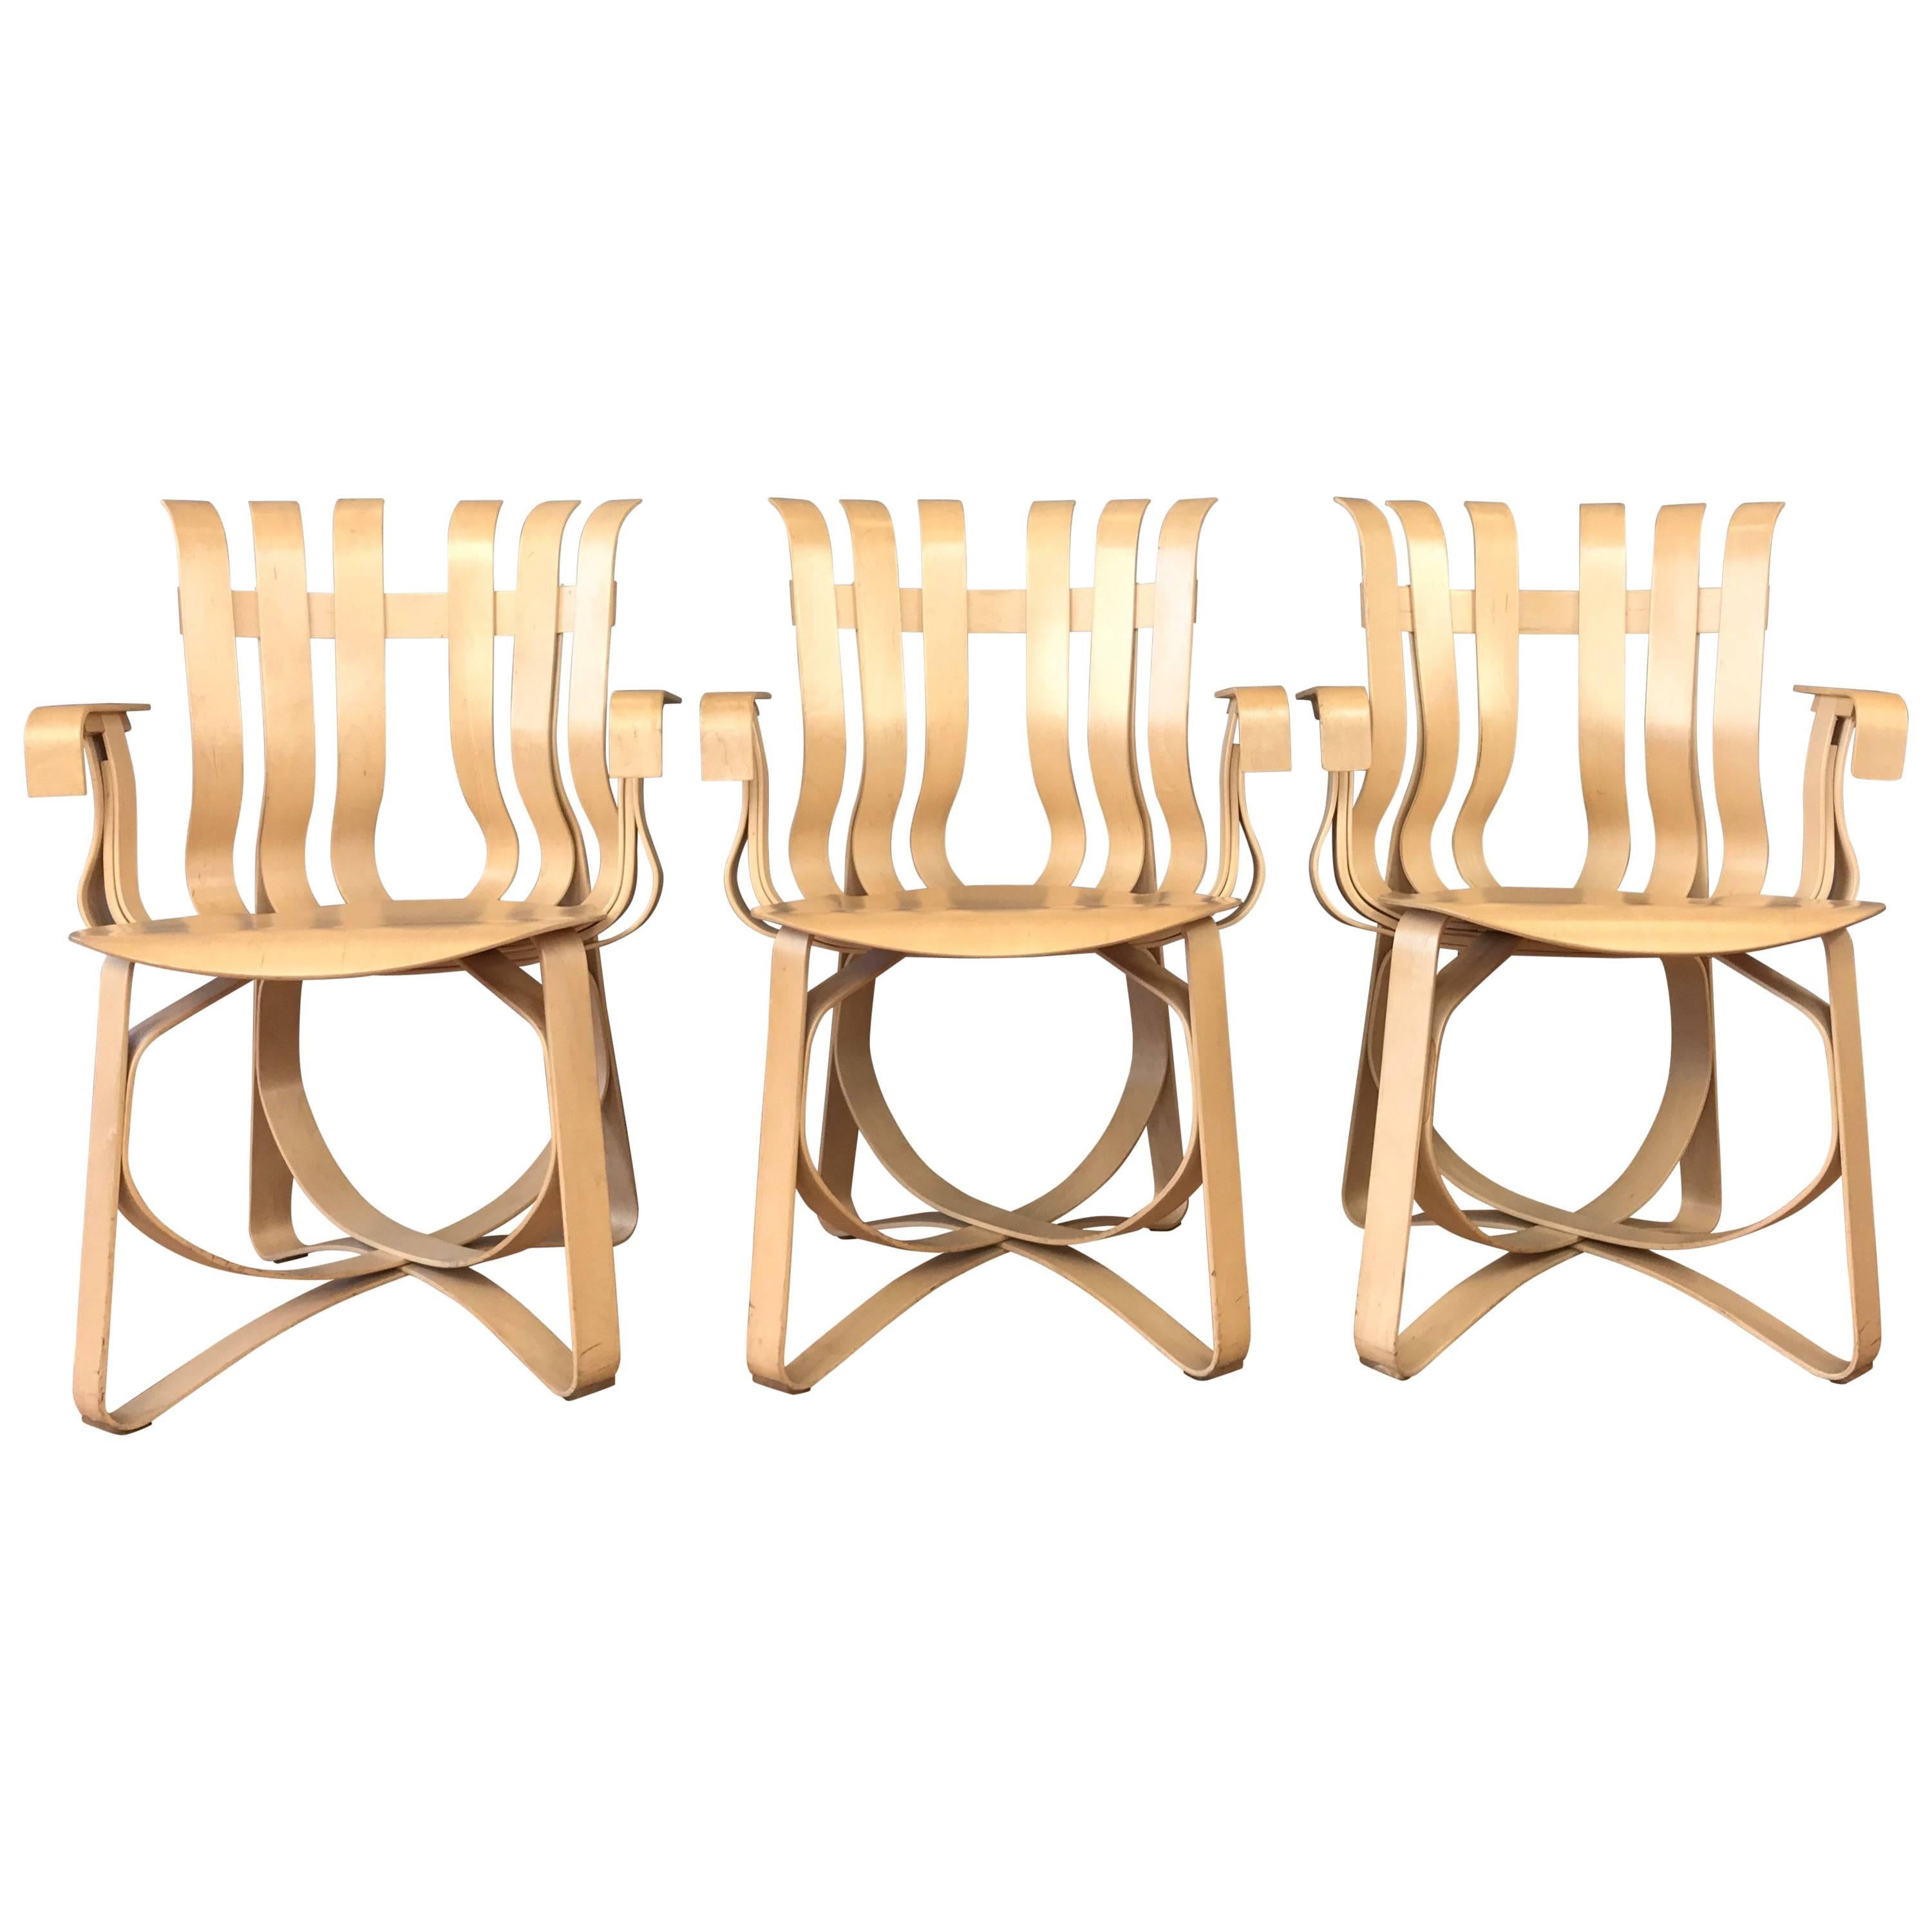 Frank Gehry for Knoll Hat Trick Chairs, Three Available